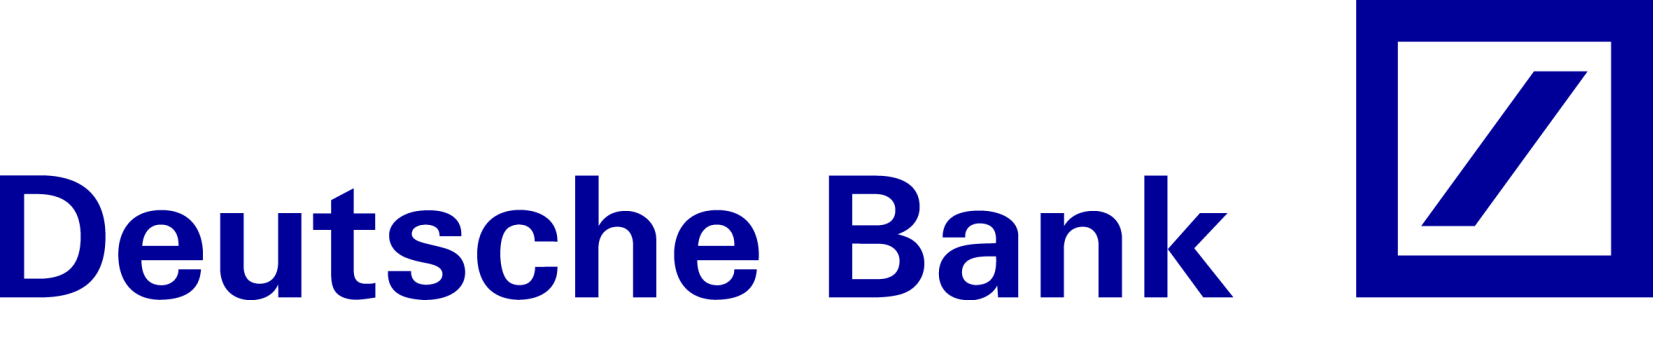 Deutsche Bank AG is a Germanybased global investment bank. The 